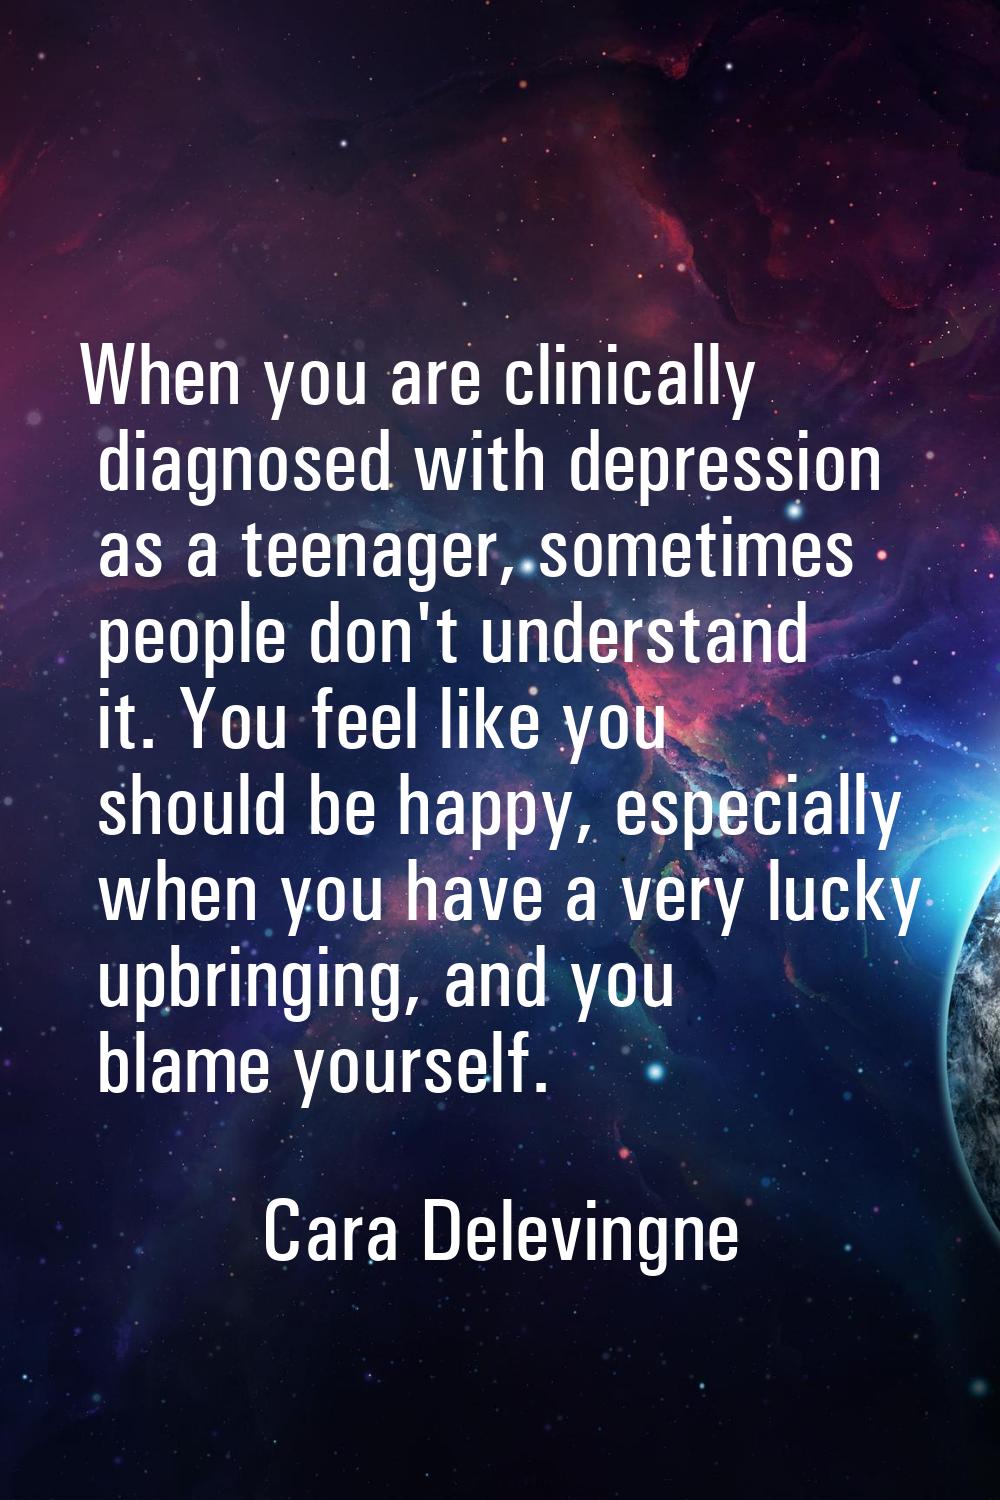 When you are clinically diagnosed with depression as a teenager, sometimes people don't understand 